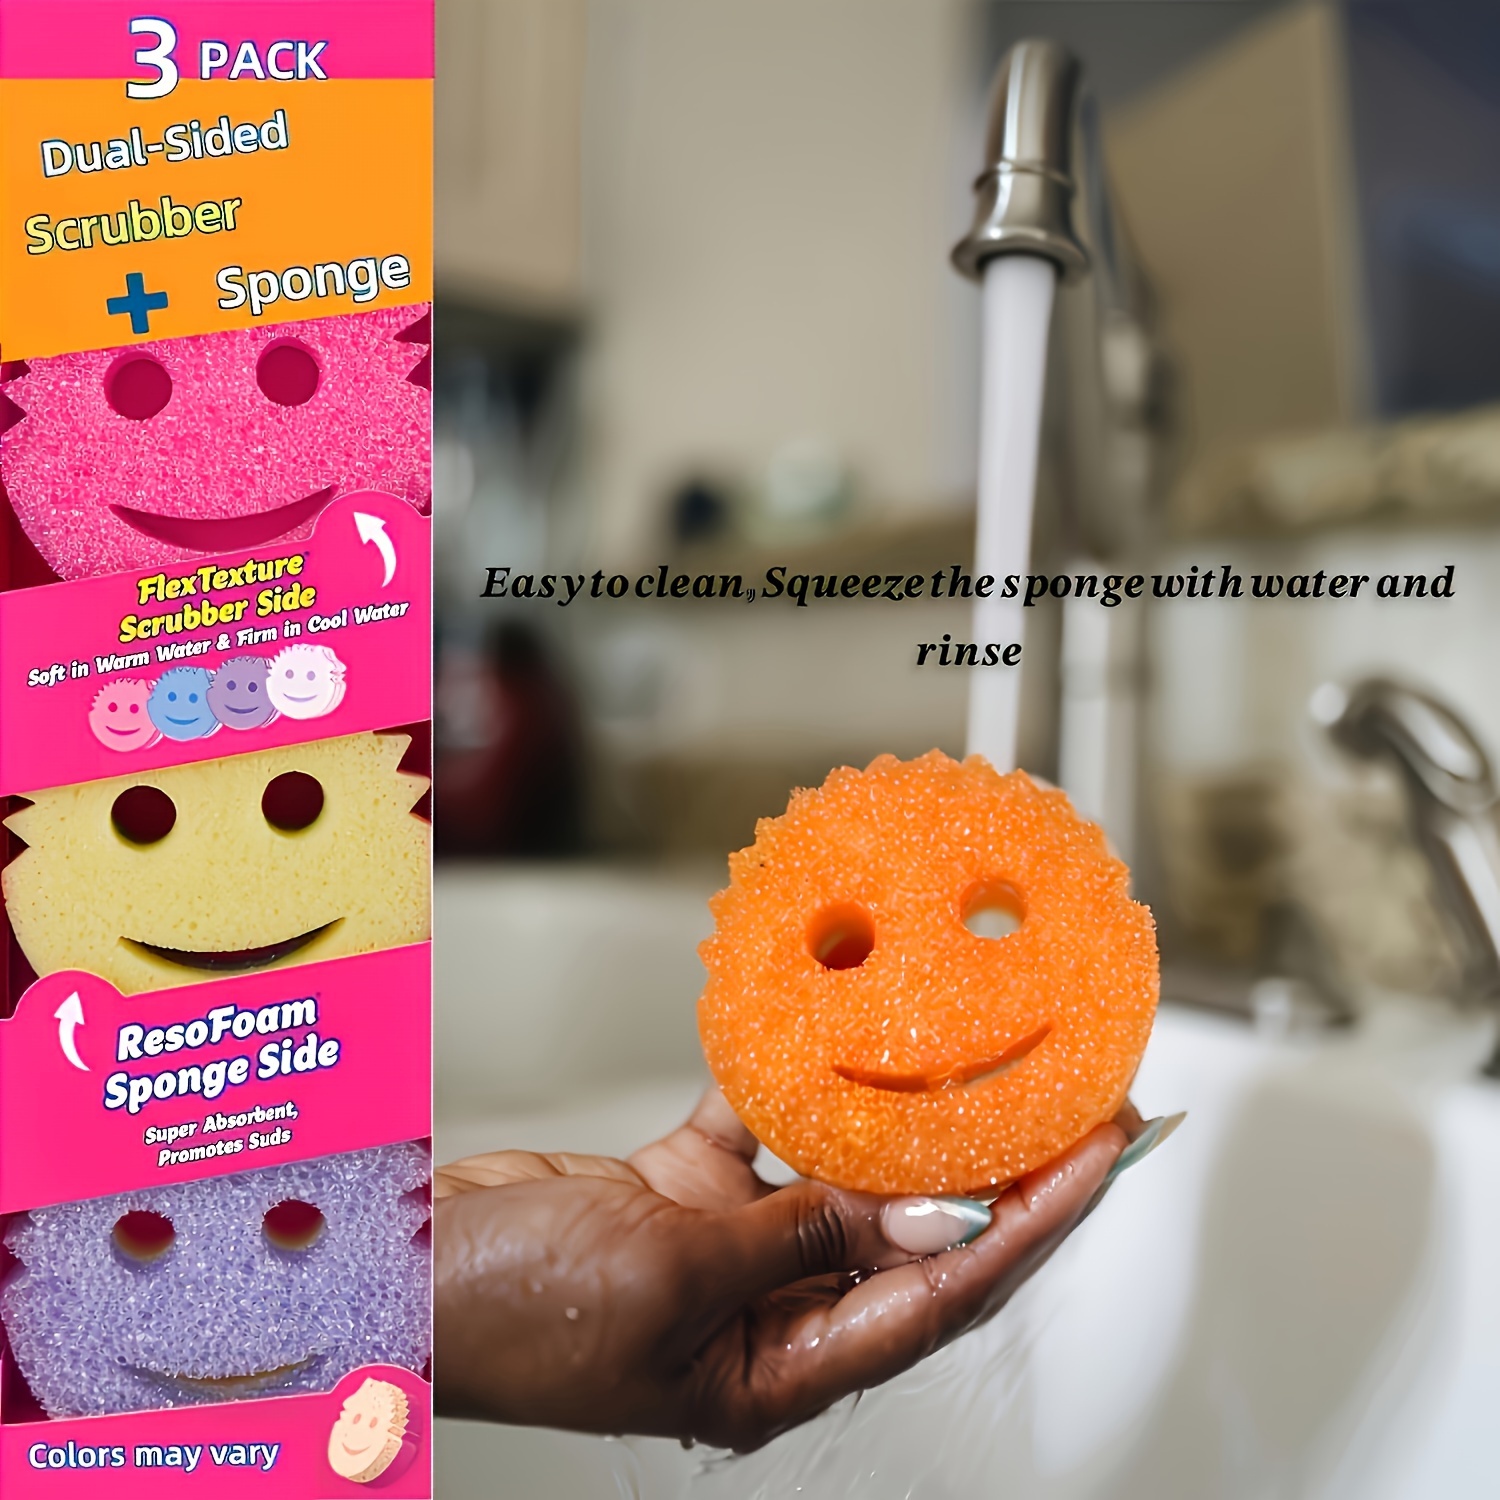 

3-pack Dual-sided Scrubbing & Sponge Pads - Temperature Sensitive, Scratch-free Cleaning Sponges For Dishes And Multi-surface Use In Bathroom & Kitchen, Flexible Texture Material For Safe Cleaning